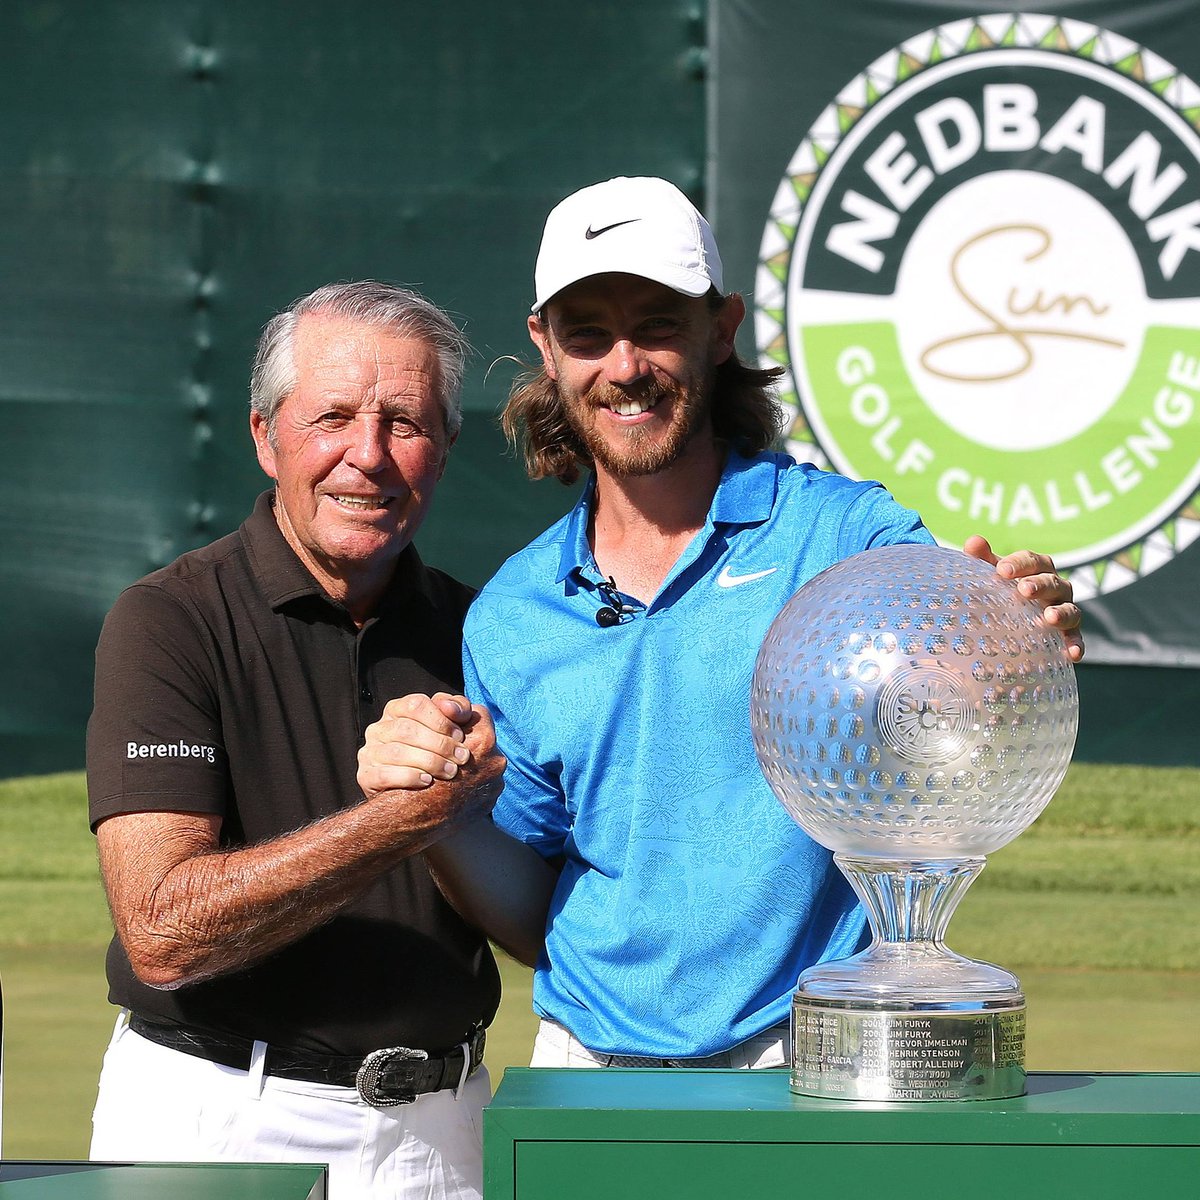 As Gary Player reflects on Africa's Major and its four-decade legacy, top golfers worldwide share what the Nedbank Golf Challenge means to them 🏌️‍♂️ Find out more on what past and present players had to say: bit.ly/3swYjkK